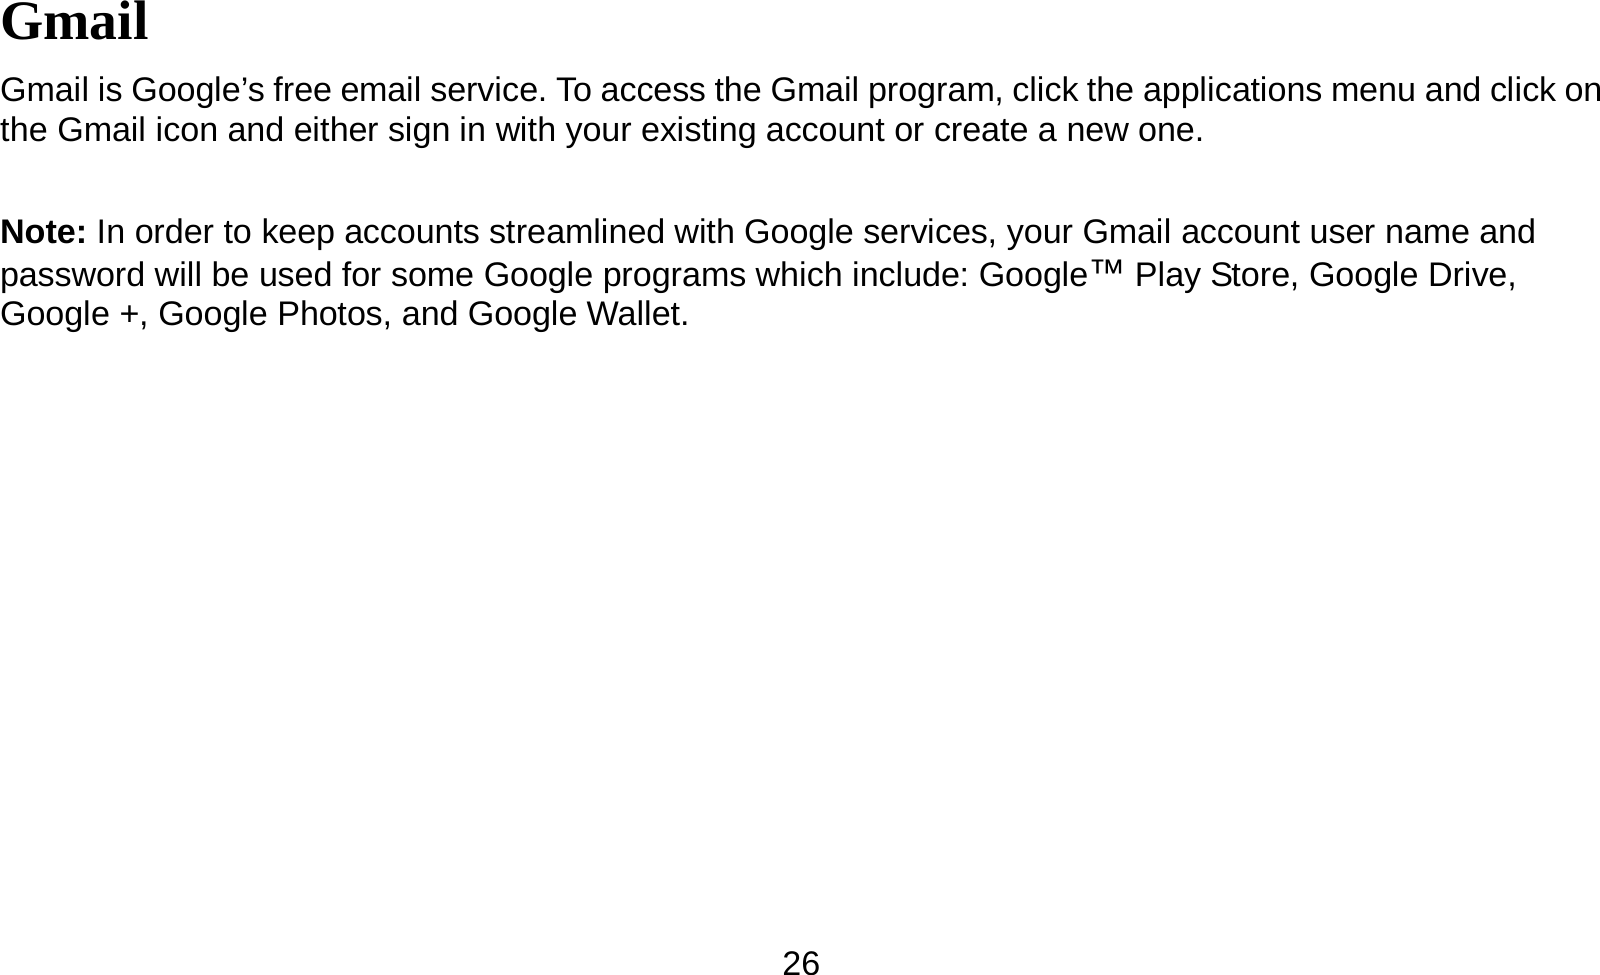   26Gmail Gmail is Google’s free email service. To access the Gmail program, click the applications menu and click on the Gmail icon and either sign in with your existing account or create a new one.    Note: In order to keep accounts streamlined with Google services, your Gmail account user name and password will be used for some Google programs which include: Google™ Play Store, Google Drive, Google +, Google Photos, and Google Wallet.   